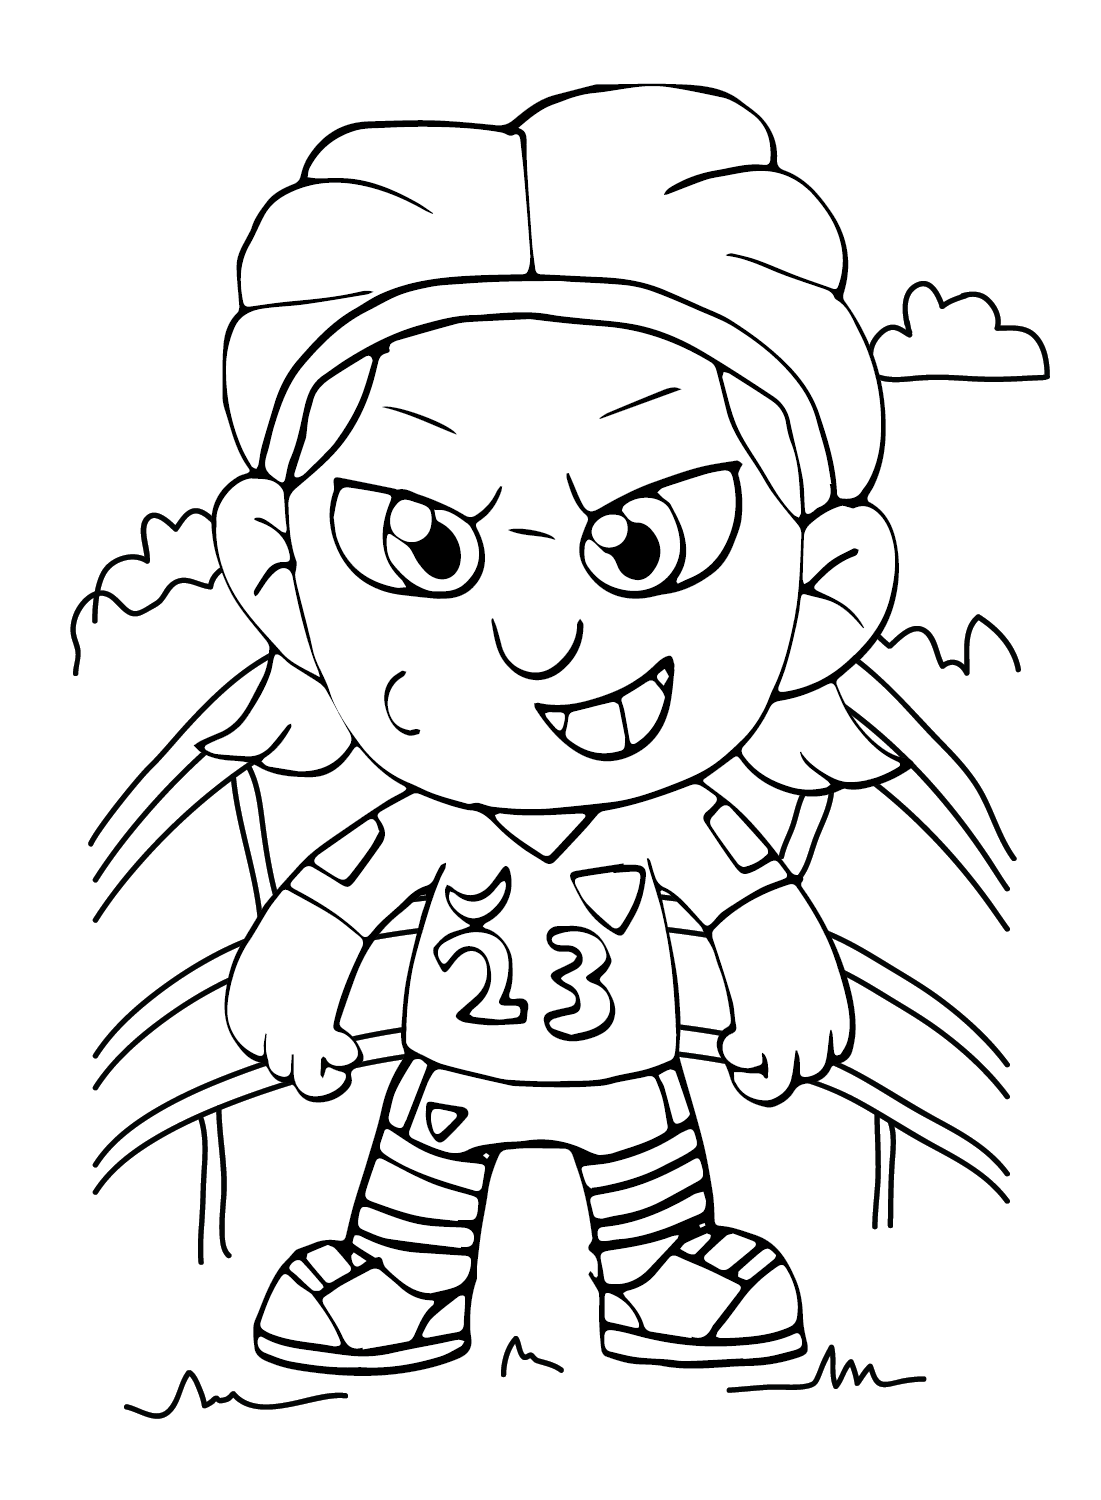 Chibi Erling Haaland Coloring Page